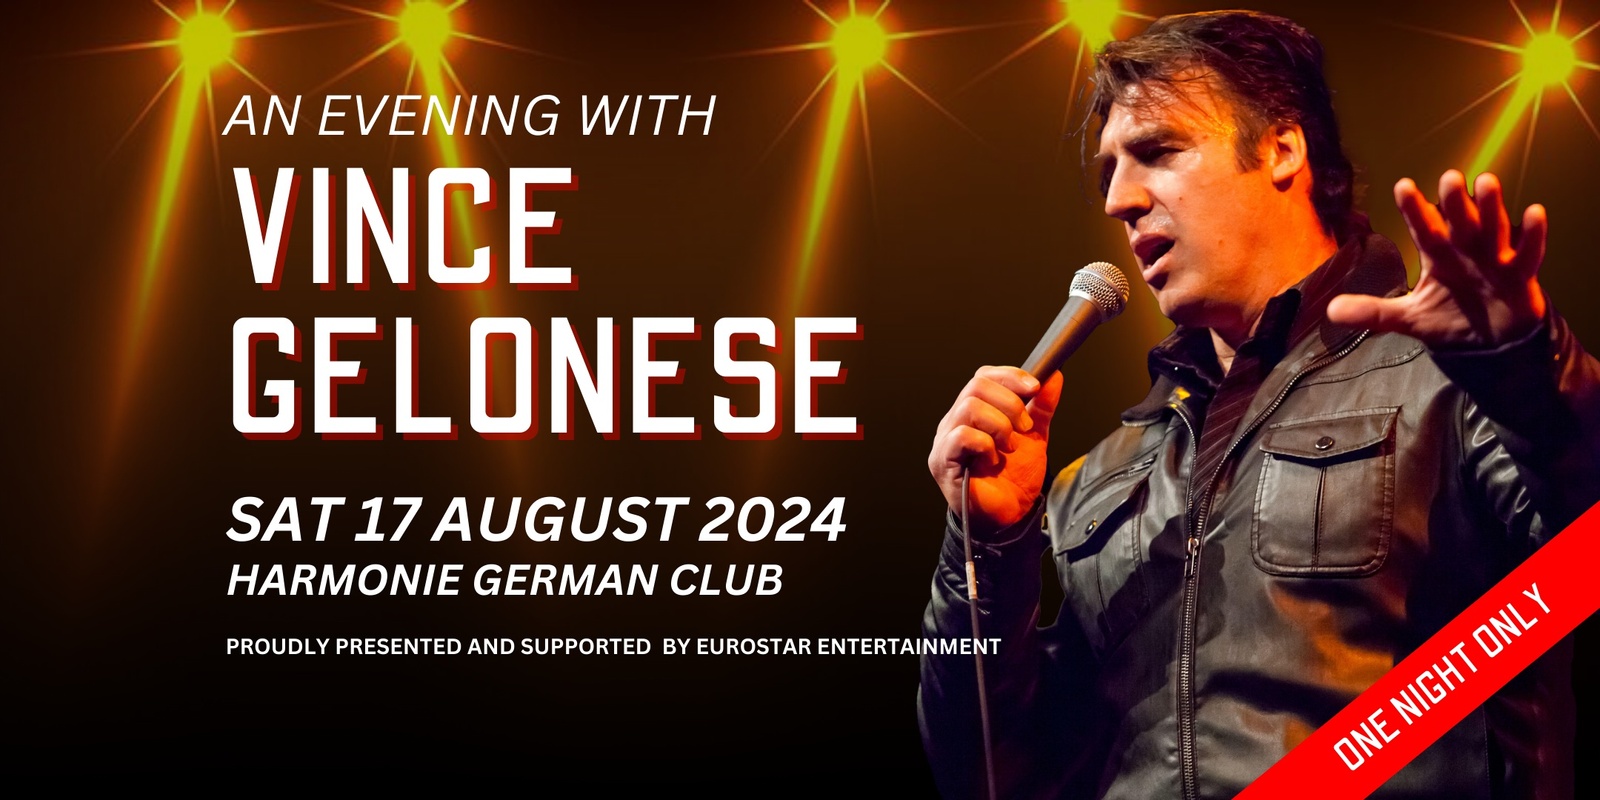 Banner image for An evening with Vince Gelonese